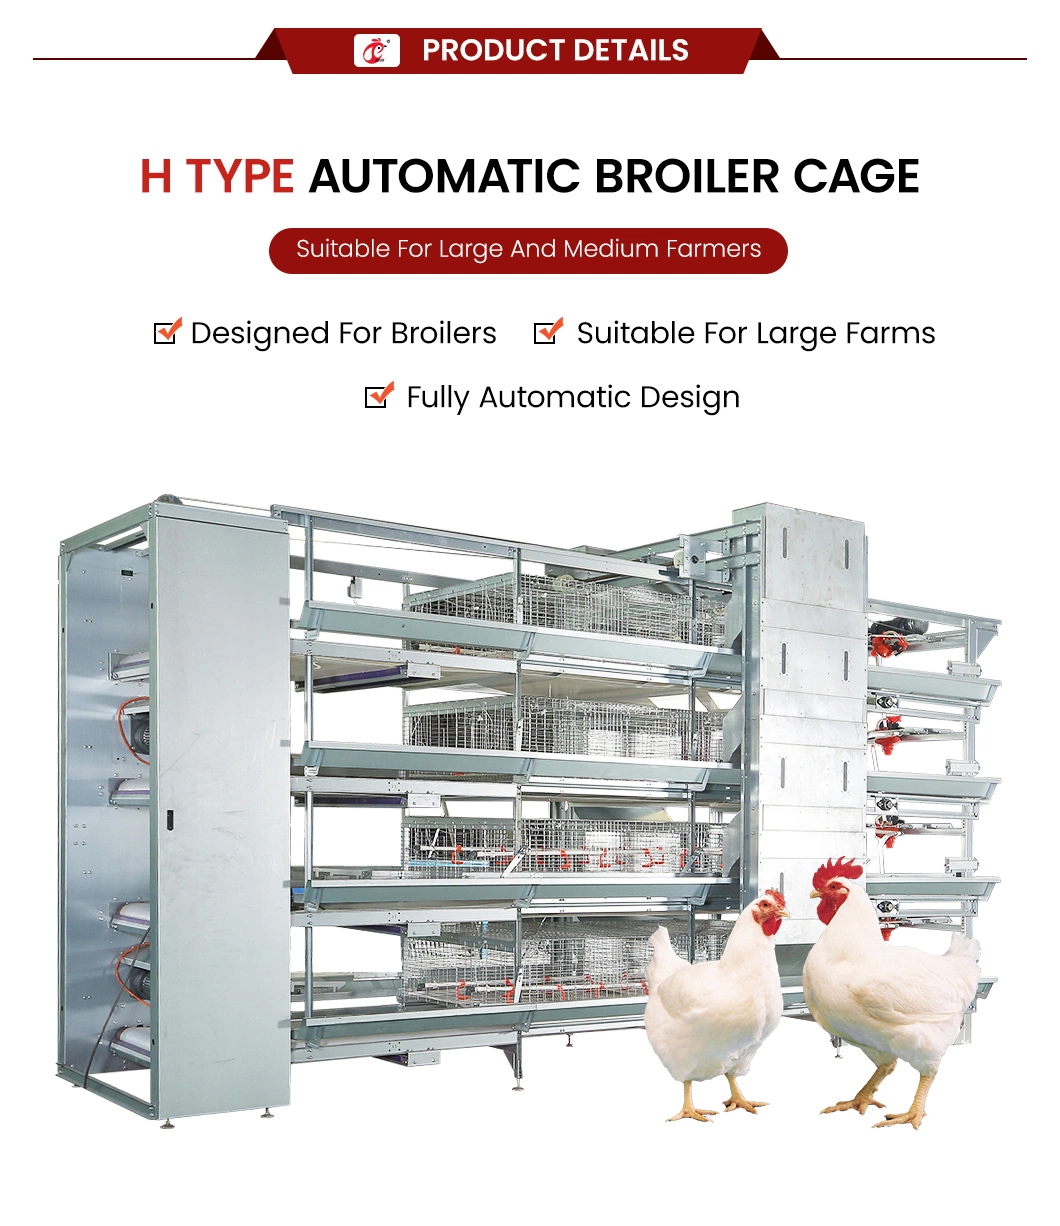 Bestchickencage China Outdoor Chicken Coops Suppliers H Frame Automatic Boriler Cages Free Sample Energy Save/Remote Control Chicken Coop Shed